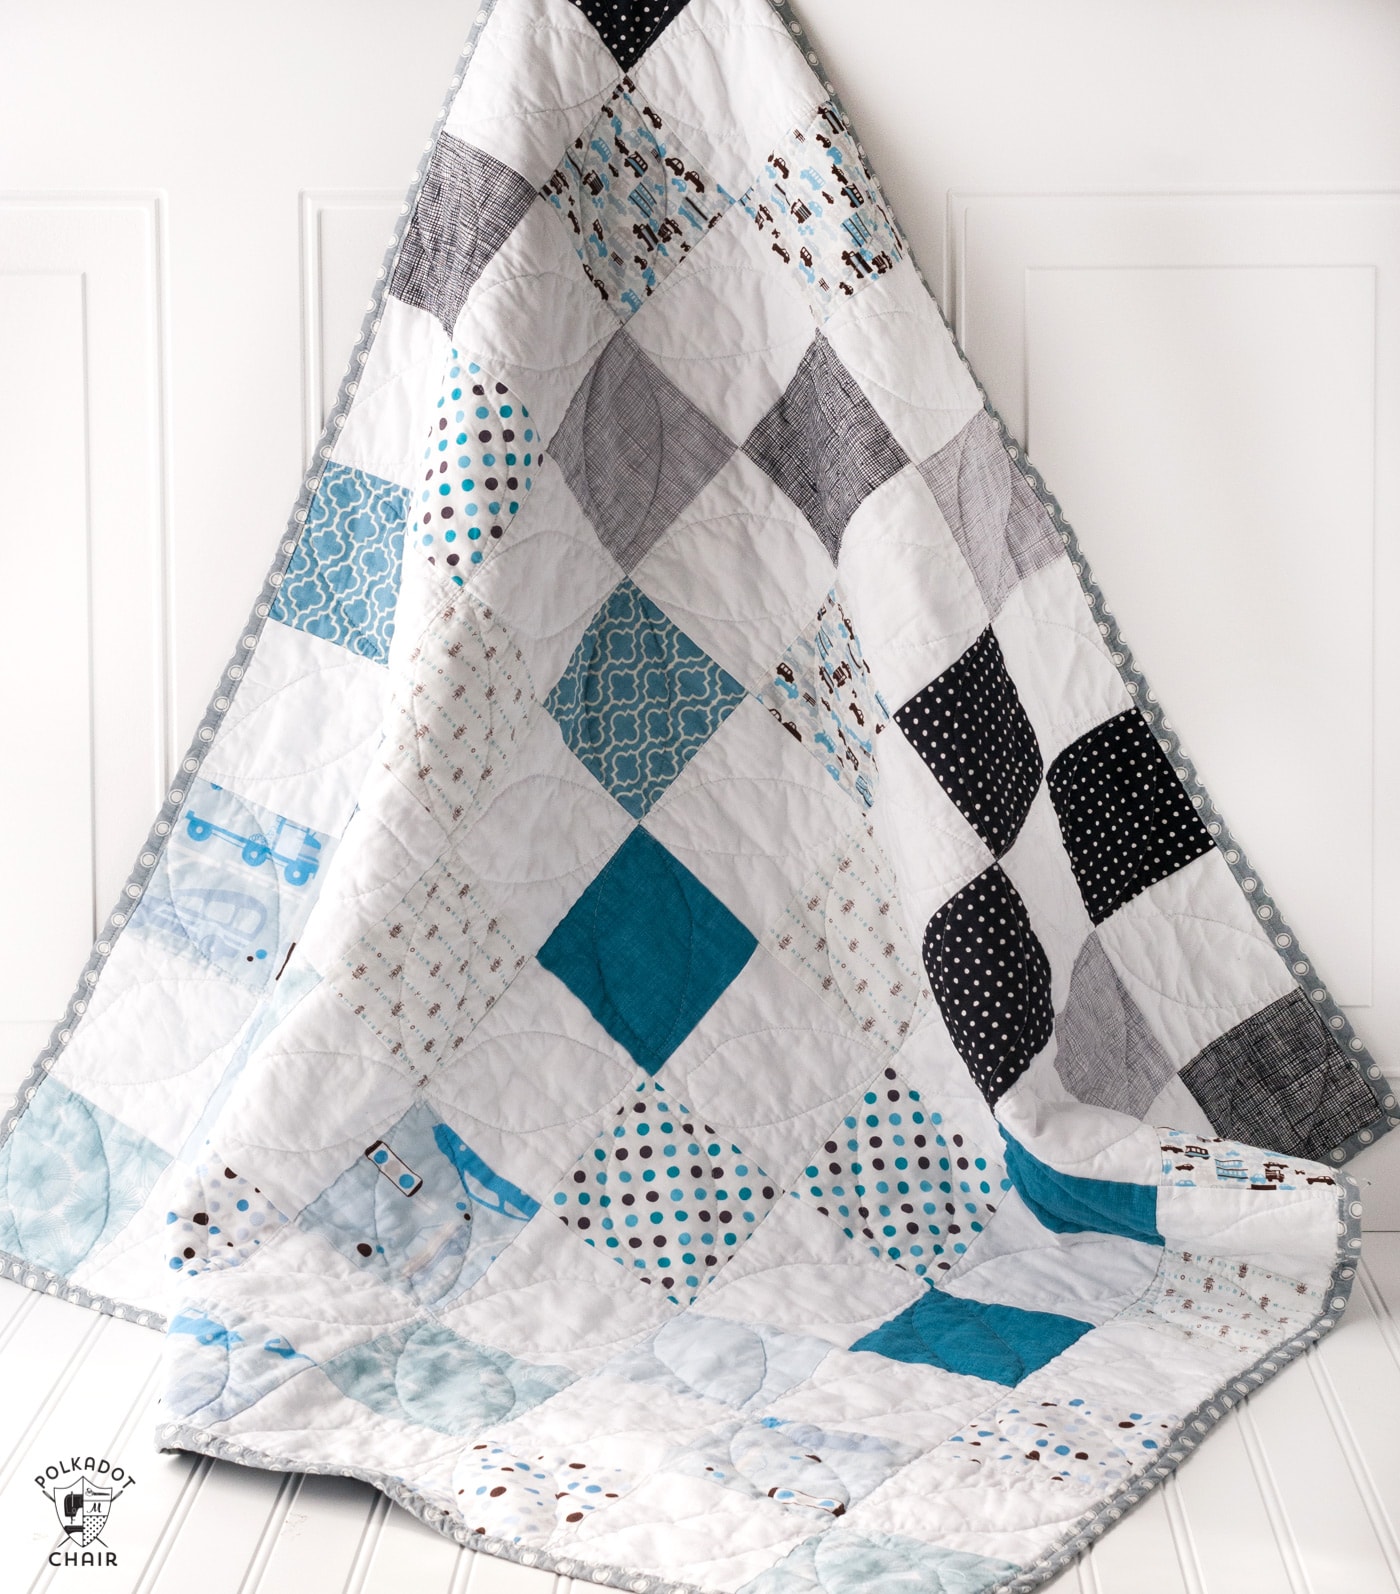 blue white and gray baby quilt on door